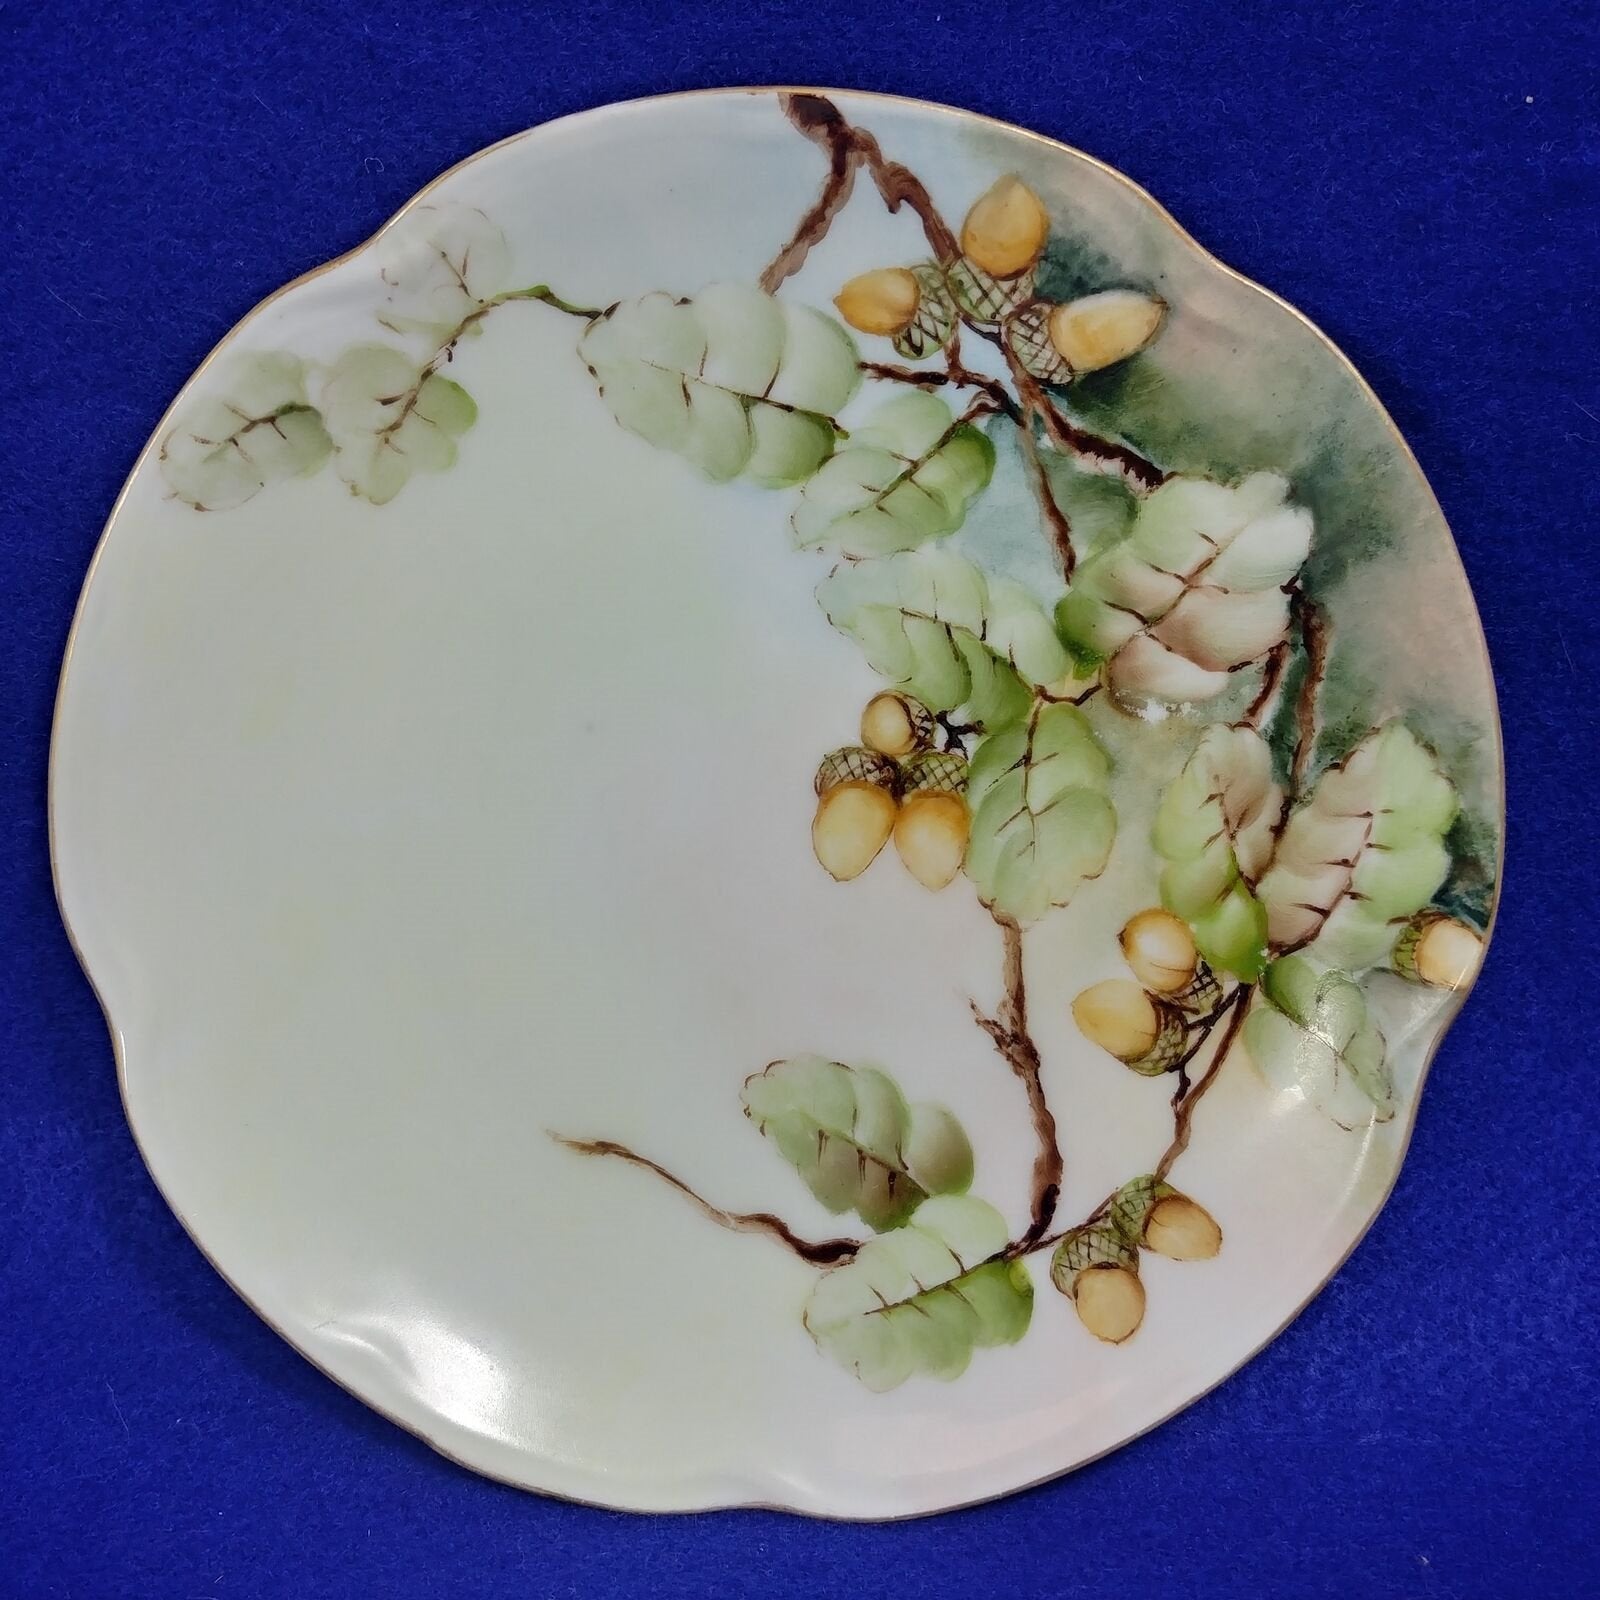 J and C Bavaria Collector Plate with Acorns Hand Painted